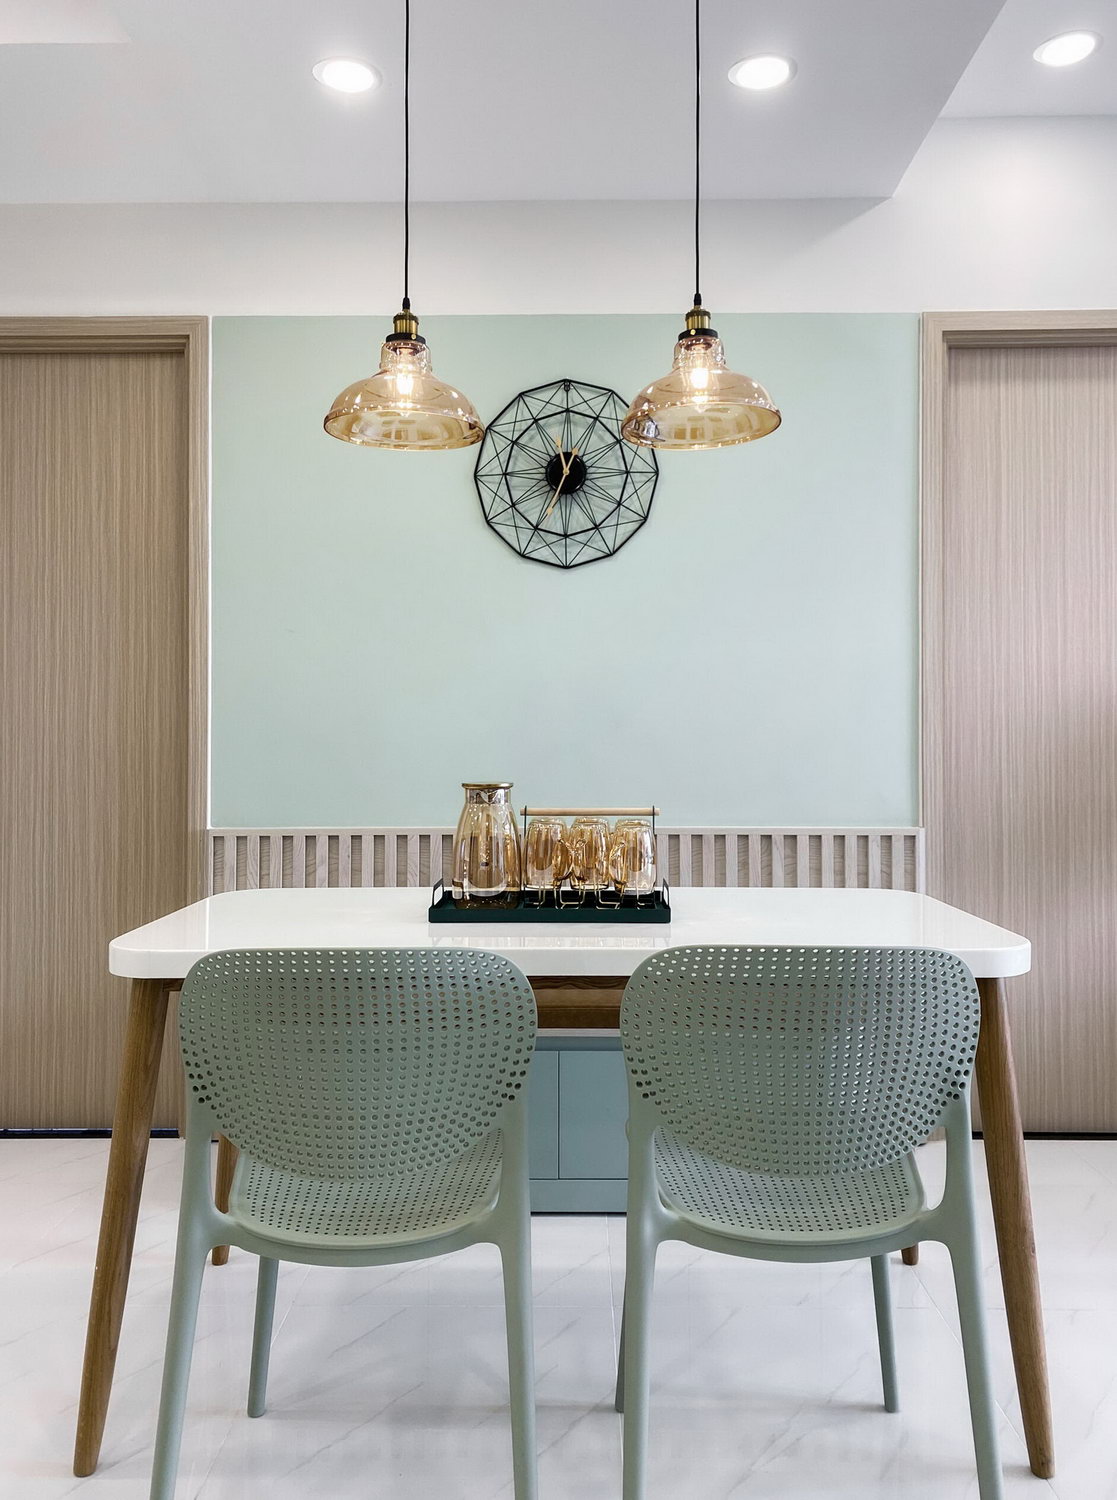 Two pendant lights draw the eye to a stylish black o’clock on the mint wall. 